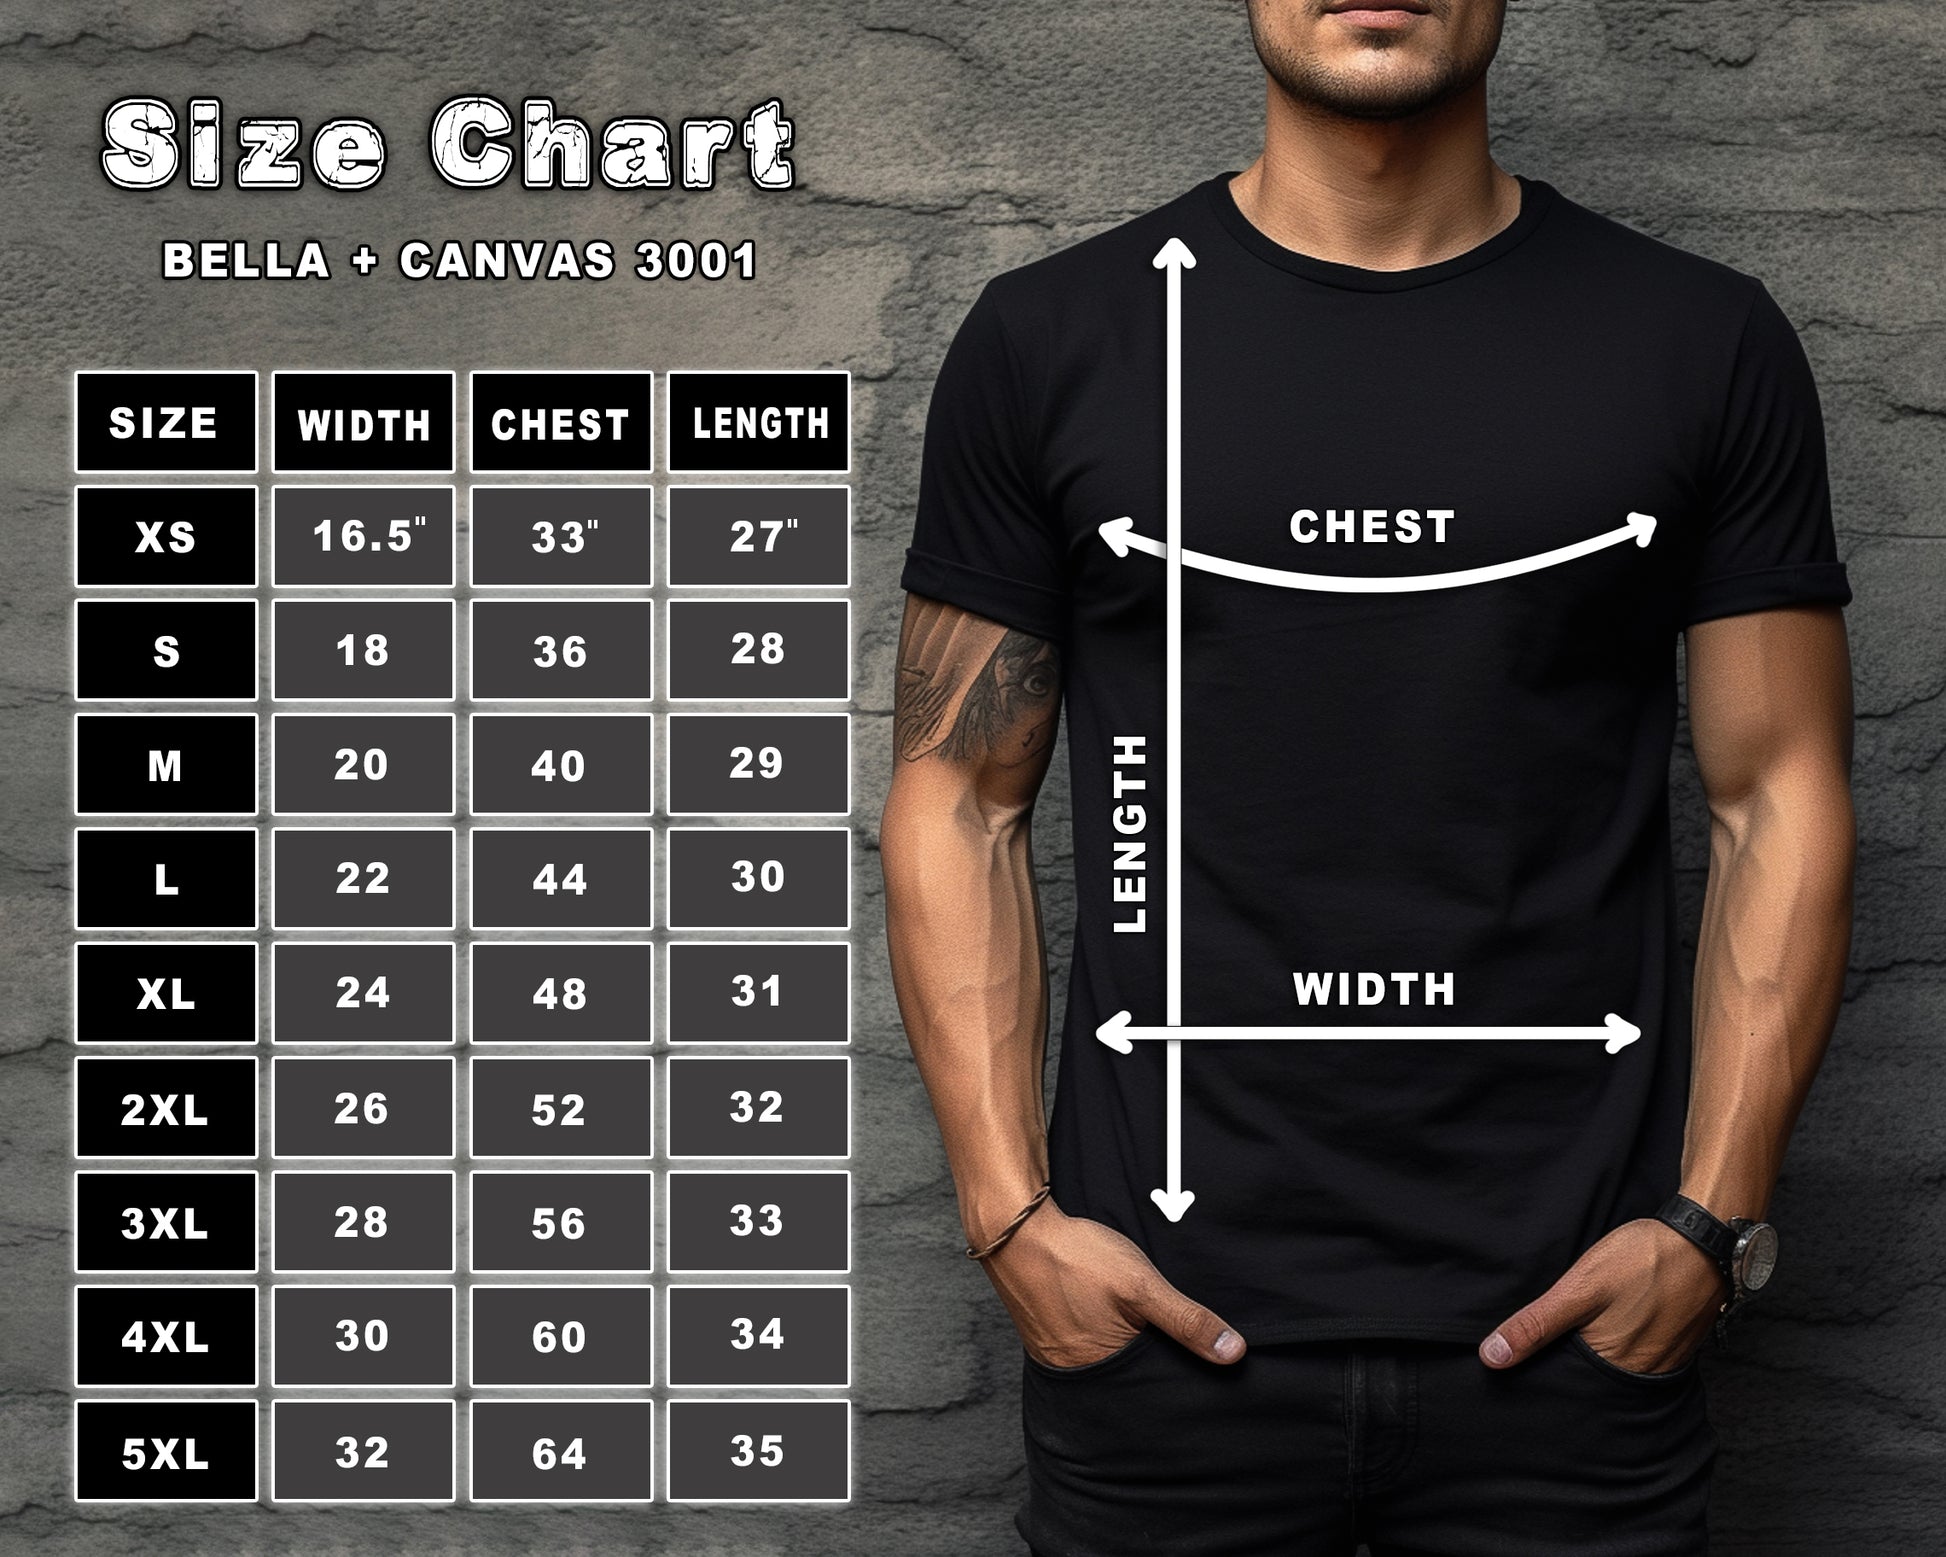 "Size chart for men's clothing by Rakkgear and Bella + Canvas, providing measurements for various dimensions to aid in selecting the right size."